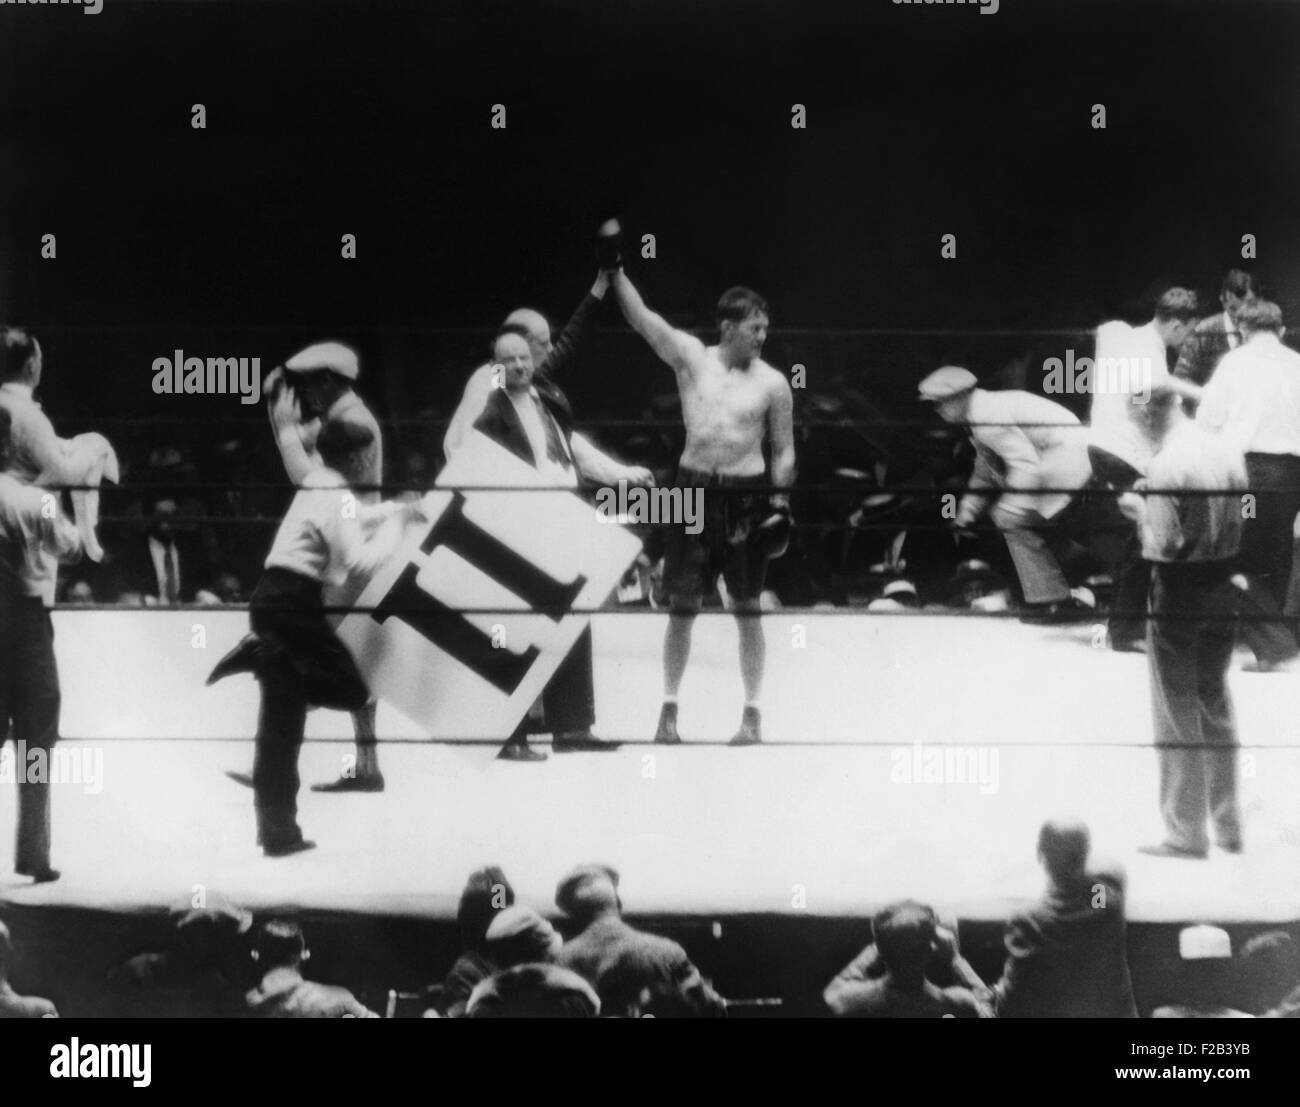 Gene Tunney defeats Tom Heeney of New Zealand by a technical knockout. The fight was stopped by the referee in the 11th round. Announcer Joe Humphries declared Tunney the winner and still the World Heavy Weight Champion. July 26, 1928. Yankee Stadium, New York City. It was Tunney's last fight. He promised his Fiance, heiress Polly Lauder, he would retire from professional boxing. - (CSU 2015 5 149) Stock Photo